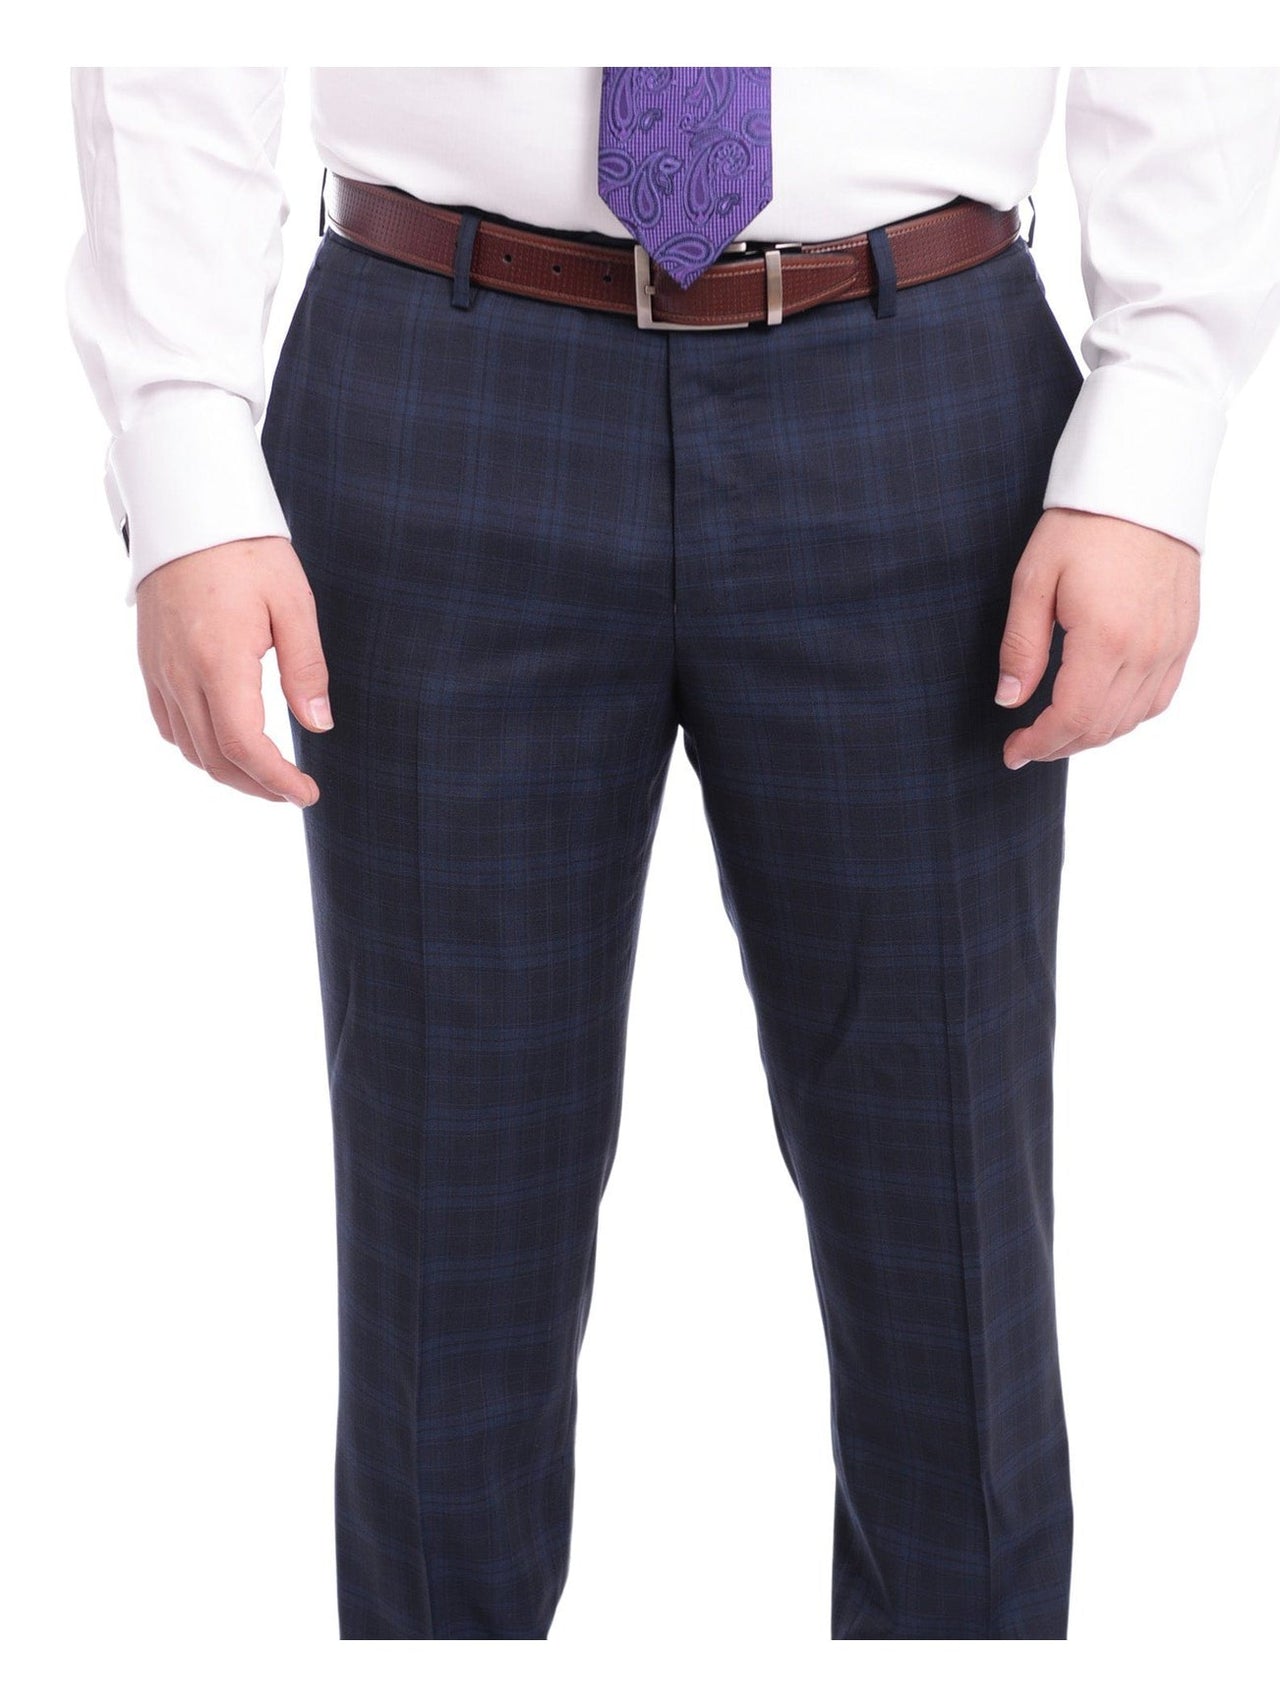 Napoli TWO PIECE SUITS Napoli Slim Fit Blue Plaid Half Canvassed Super 120s Guabello Wool Suit